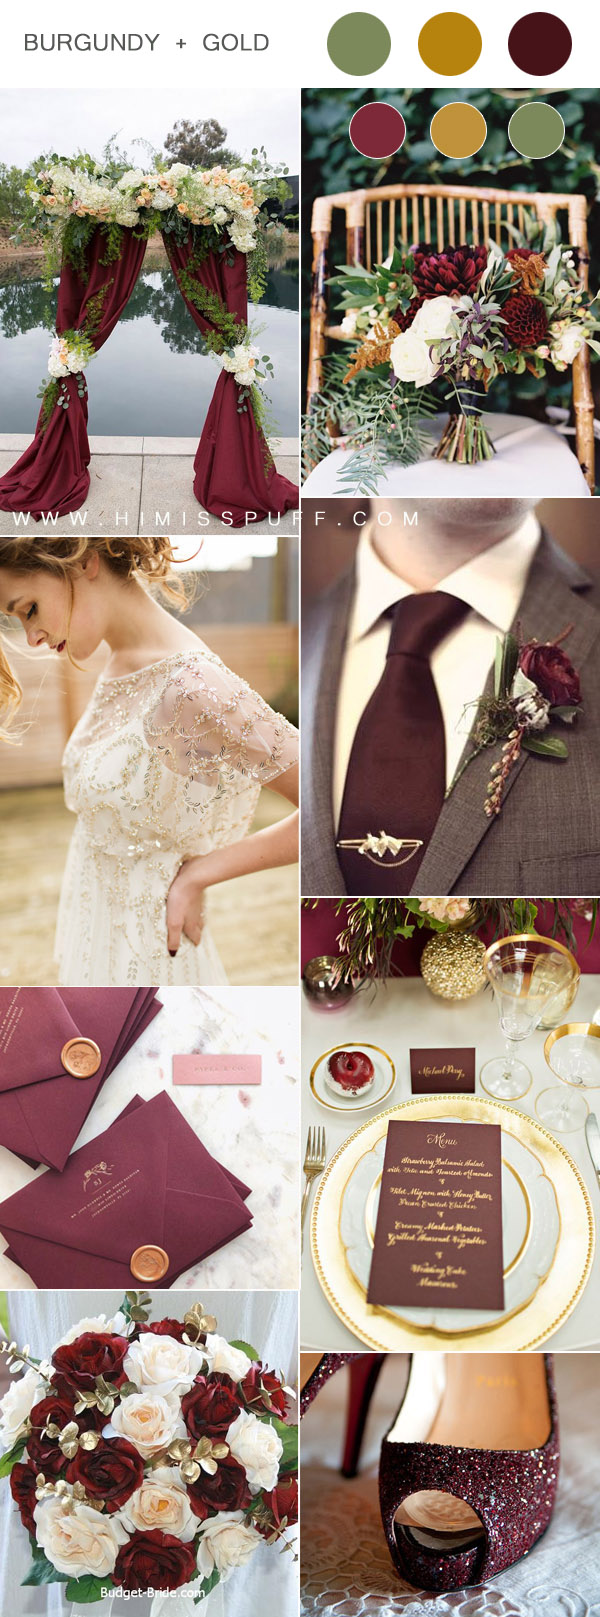 Chic Burgundy and Gold Wedding Color Combinations for fall